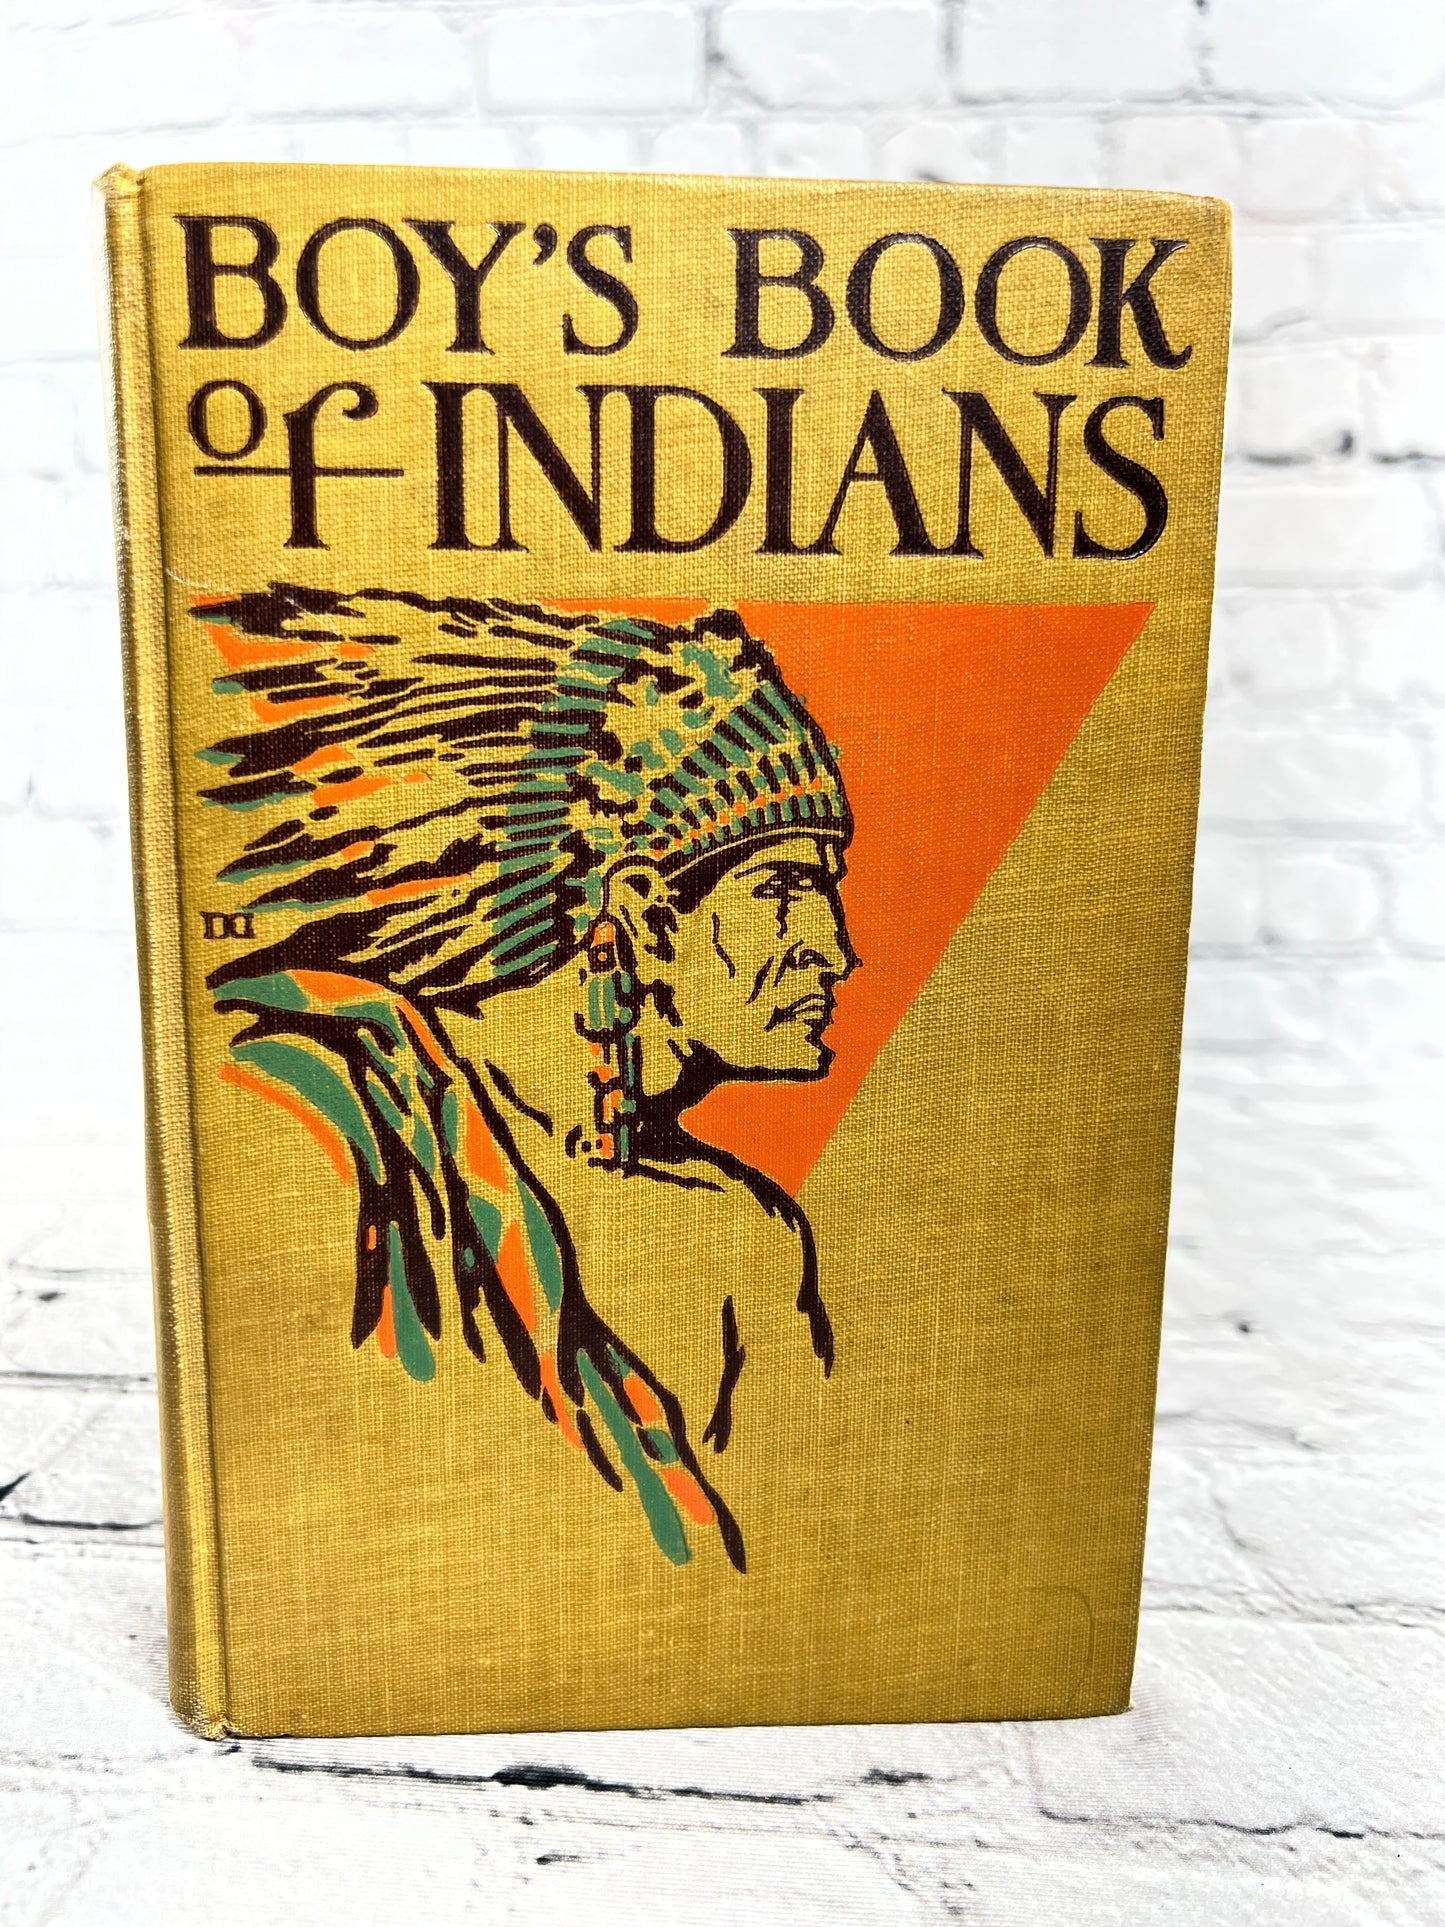 Boy's Book of Indians by Philip V. Mighels [1903 · 1st Edition]